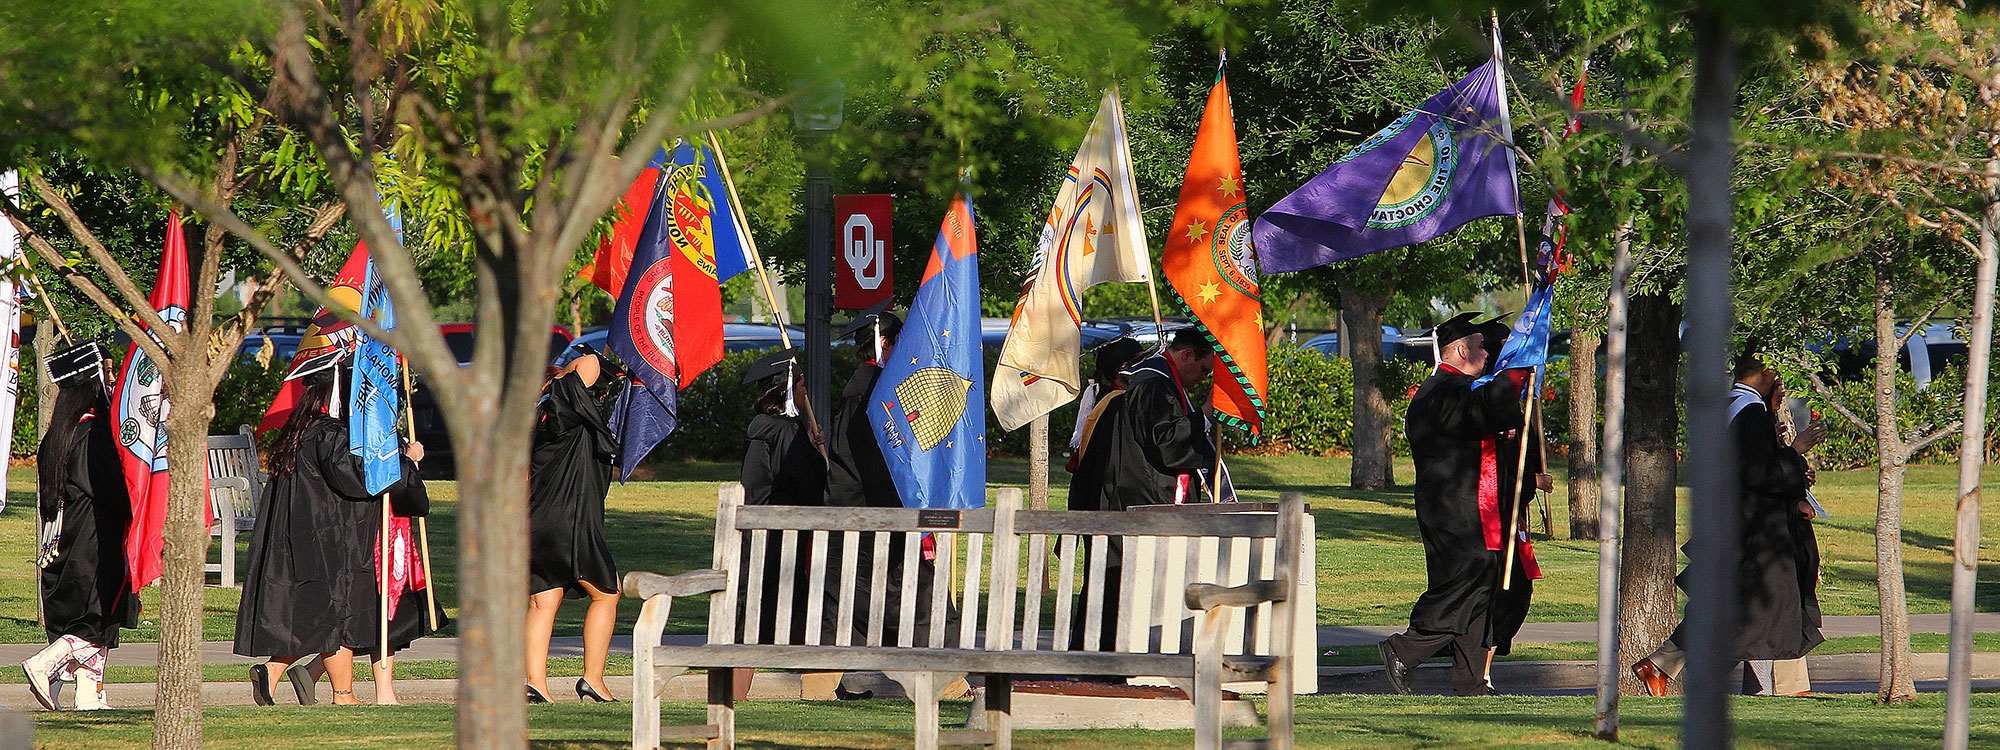 Graduation procession with various commencement flags